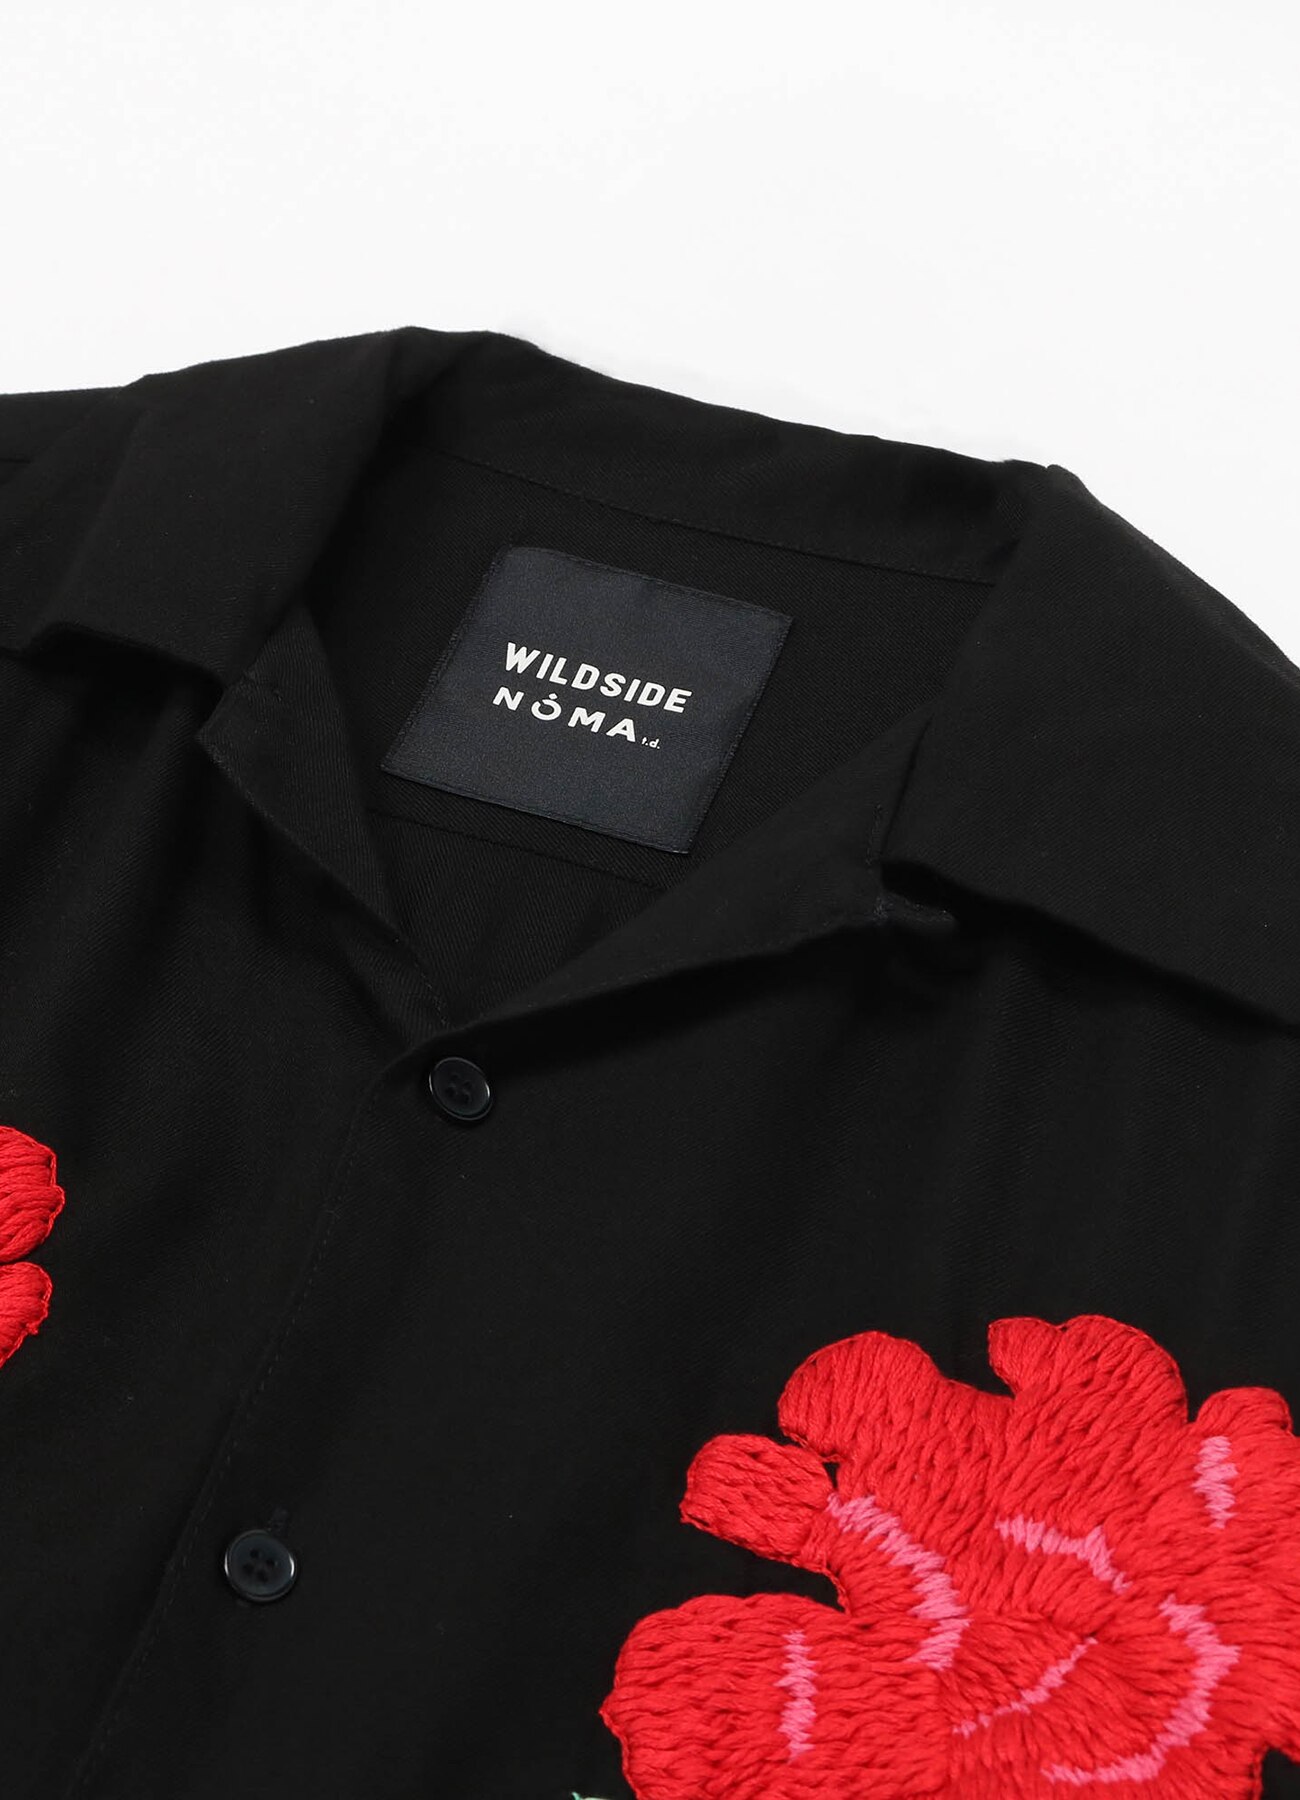 WILDSIDE × NOMA t.d. HAND EMBROIDERY Shirt